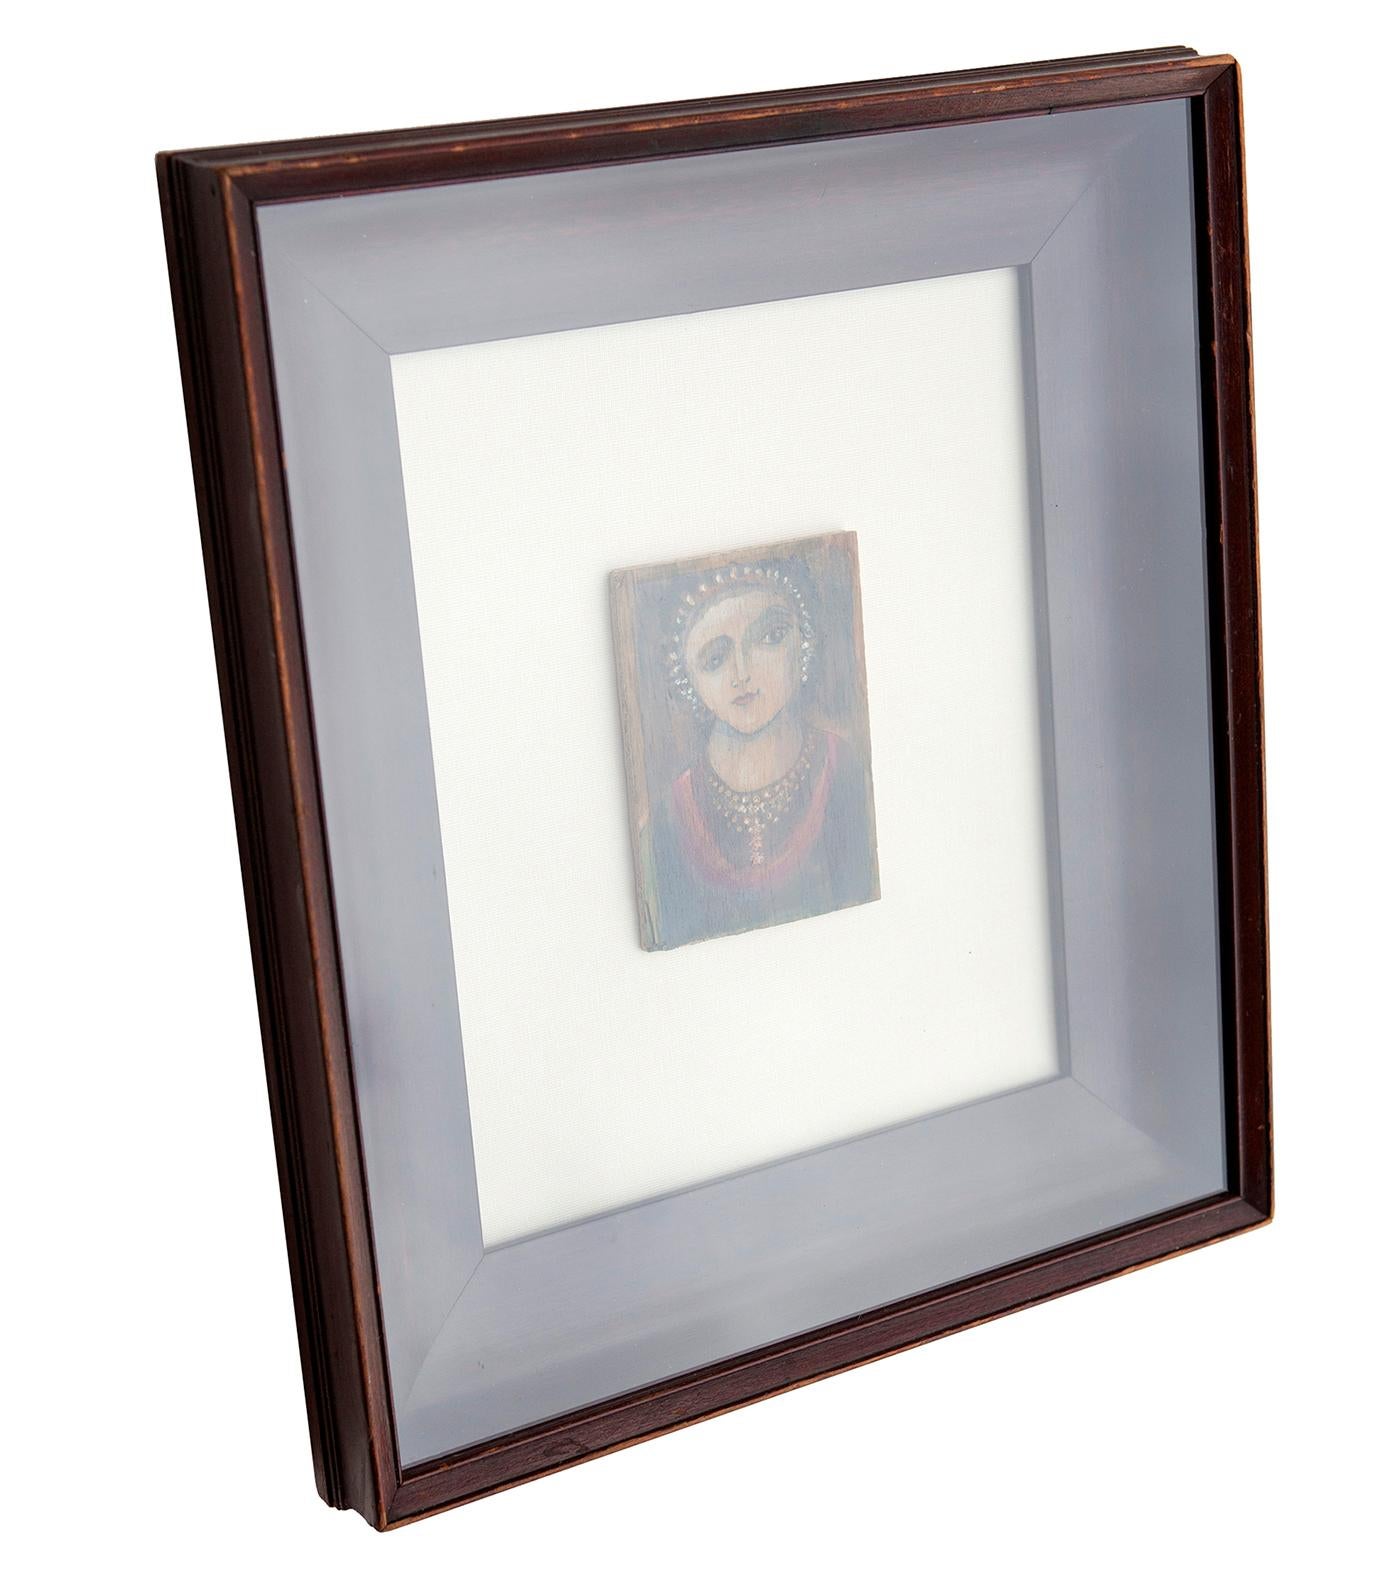 Original oil painting mounted on linen & place in antique Empire period shadowbox mahogany frame. Unknown naive painting with a charming rendition of a female bust. The painting is dated, 2005.
